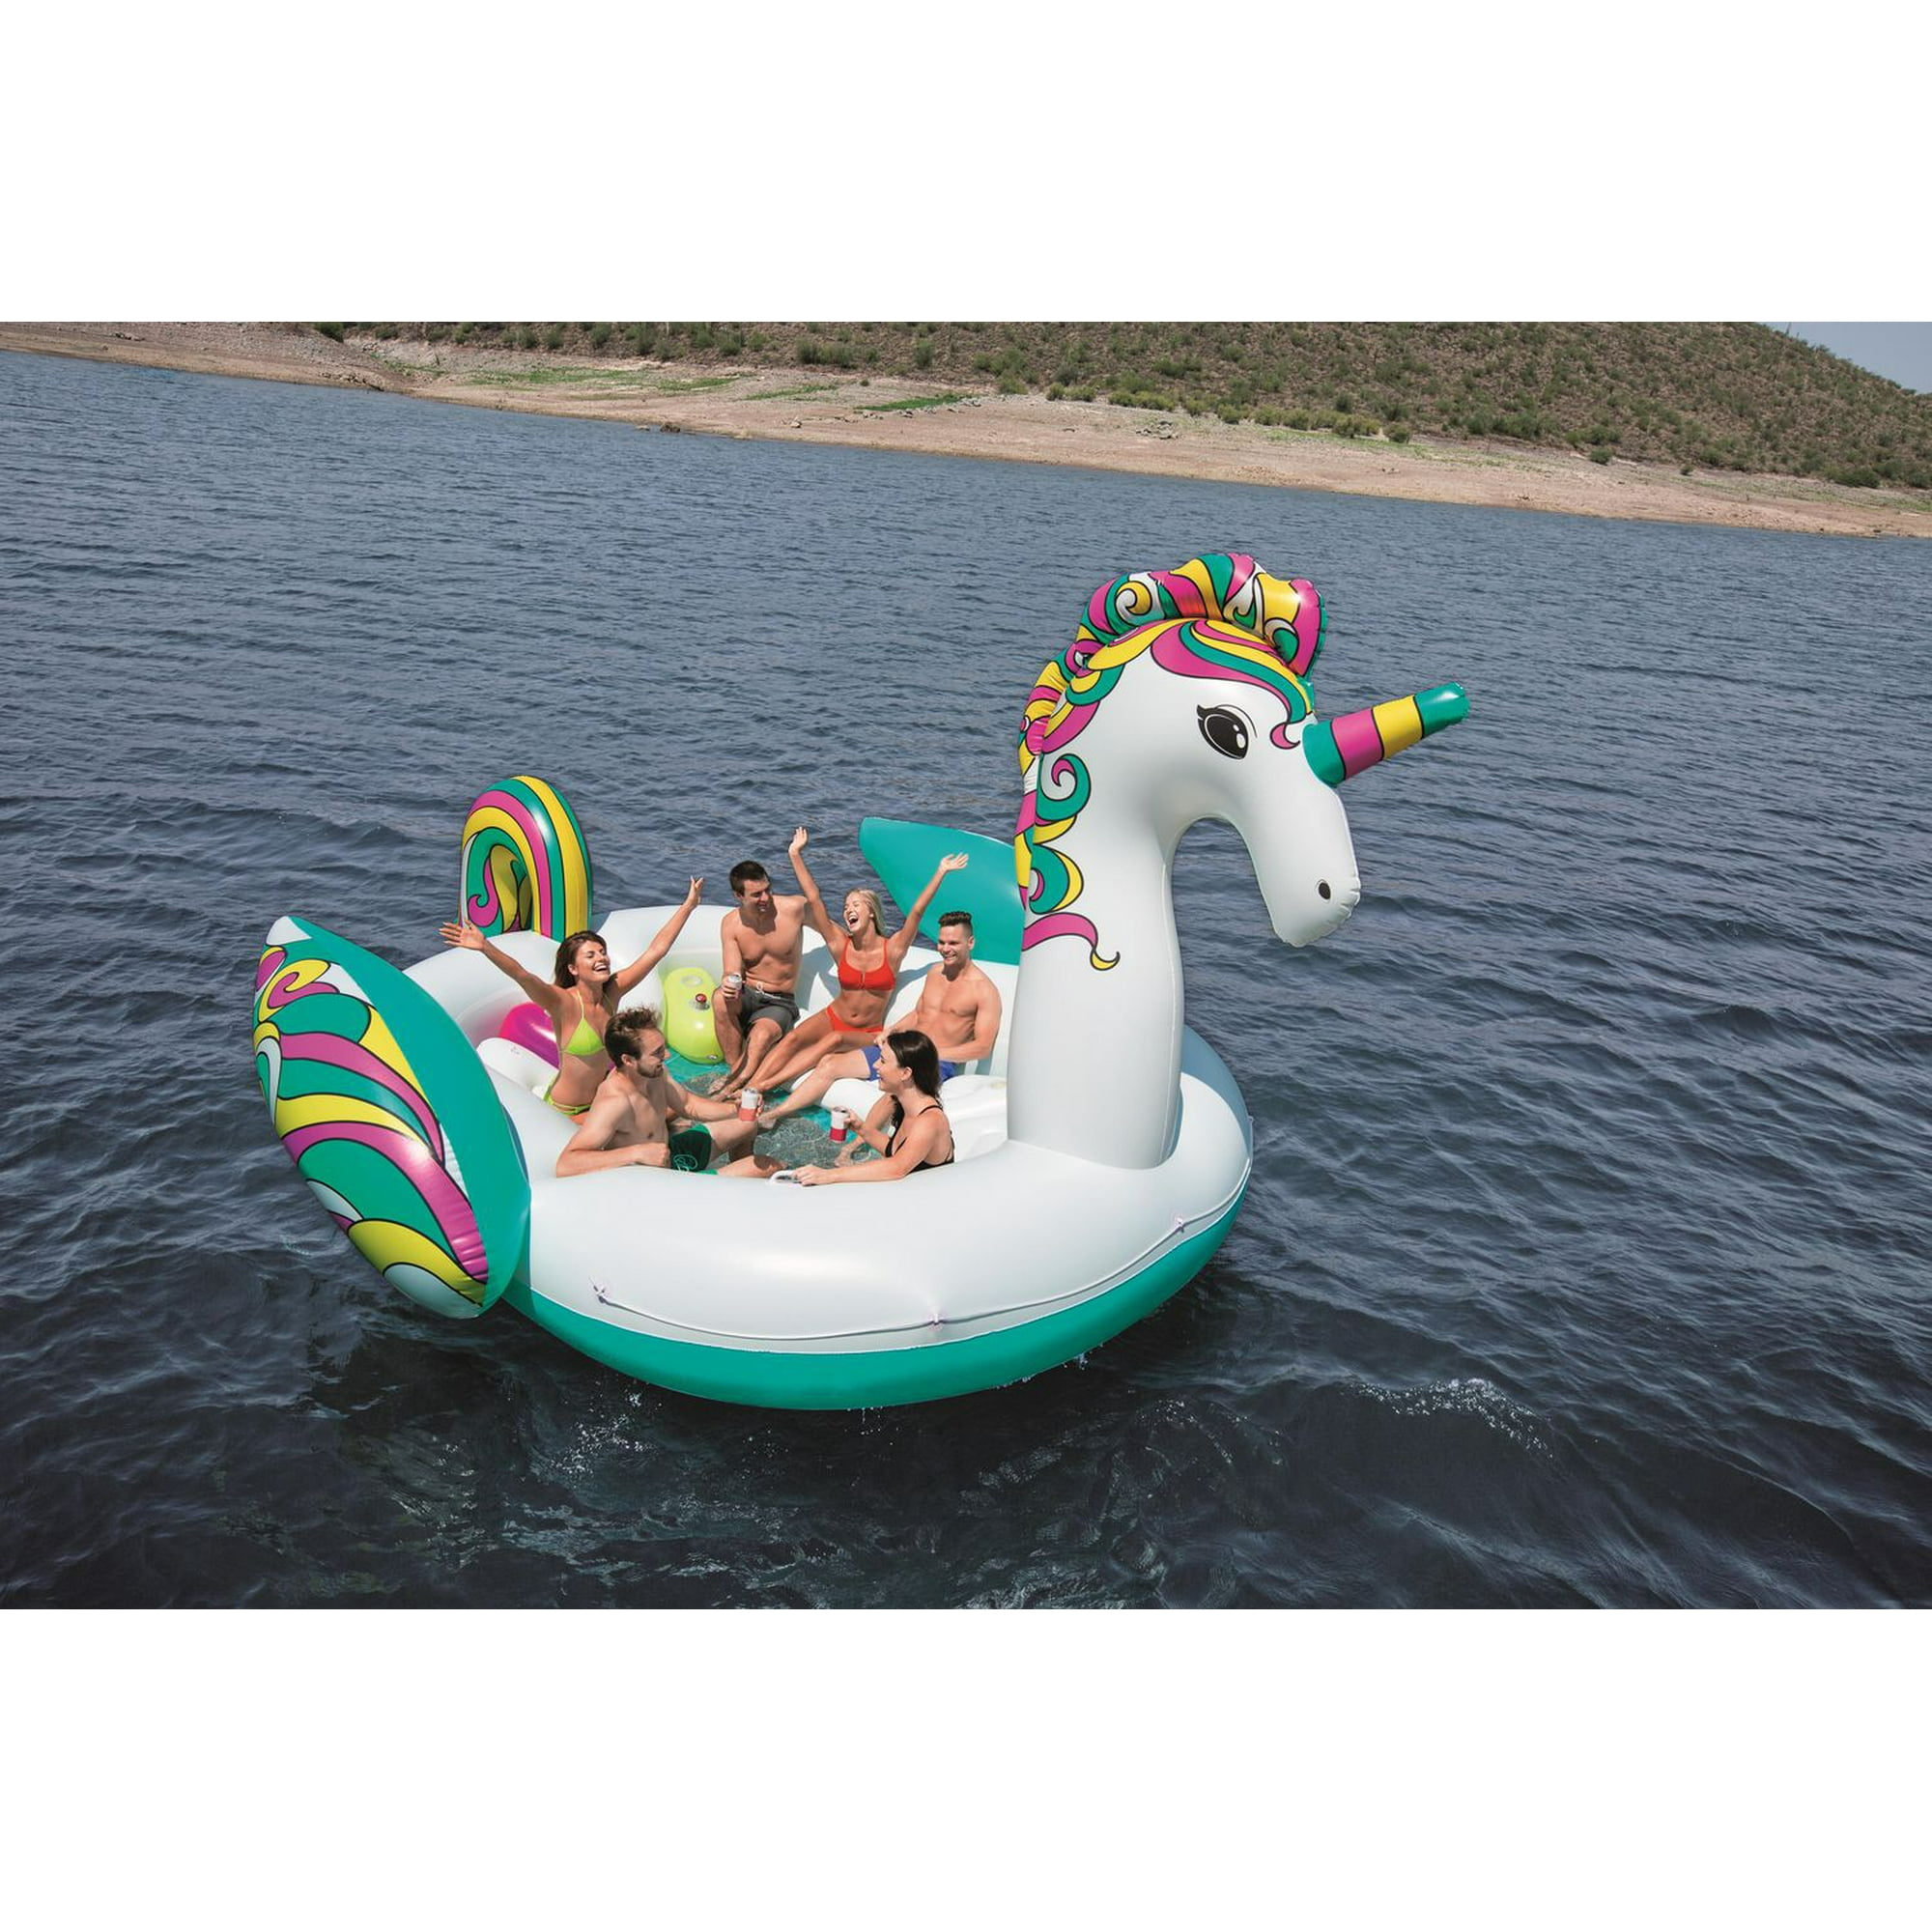 H20GO! Extrava Fabric Inflatable Floating Pool Island by Bestway